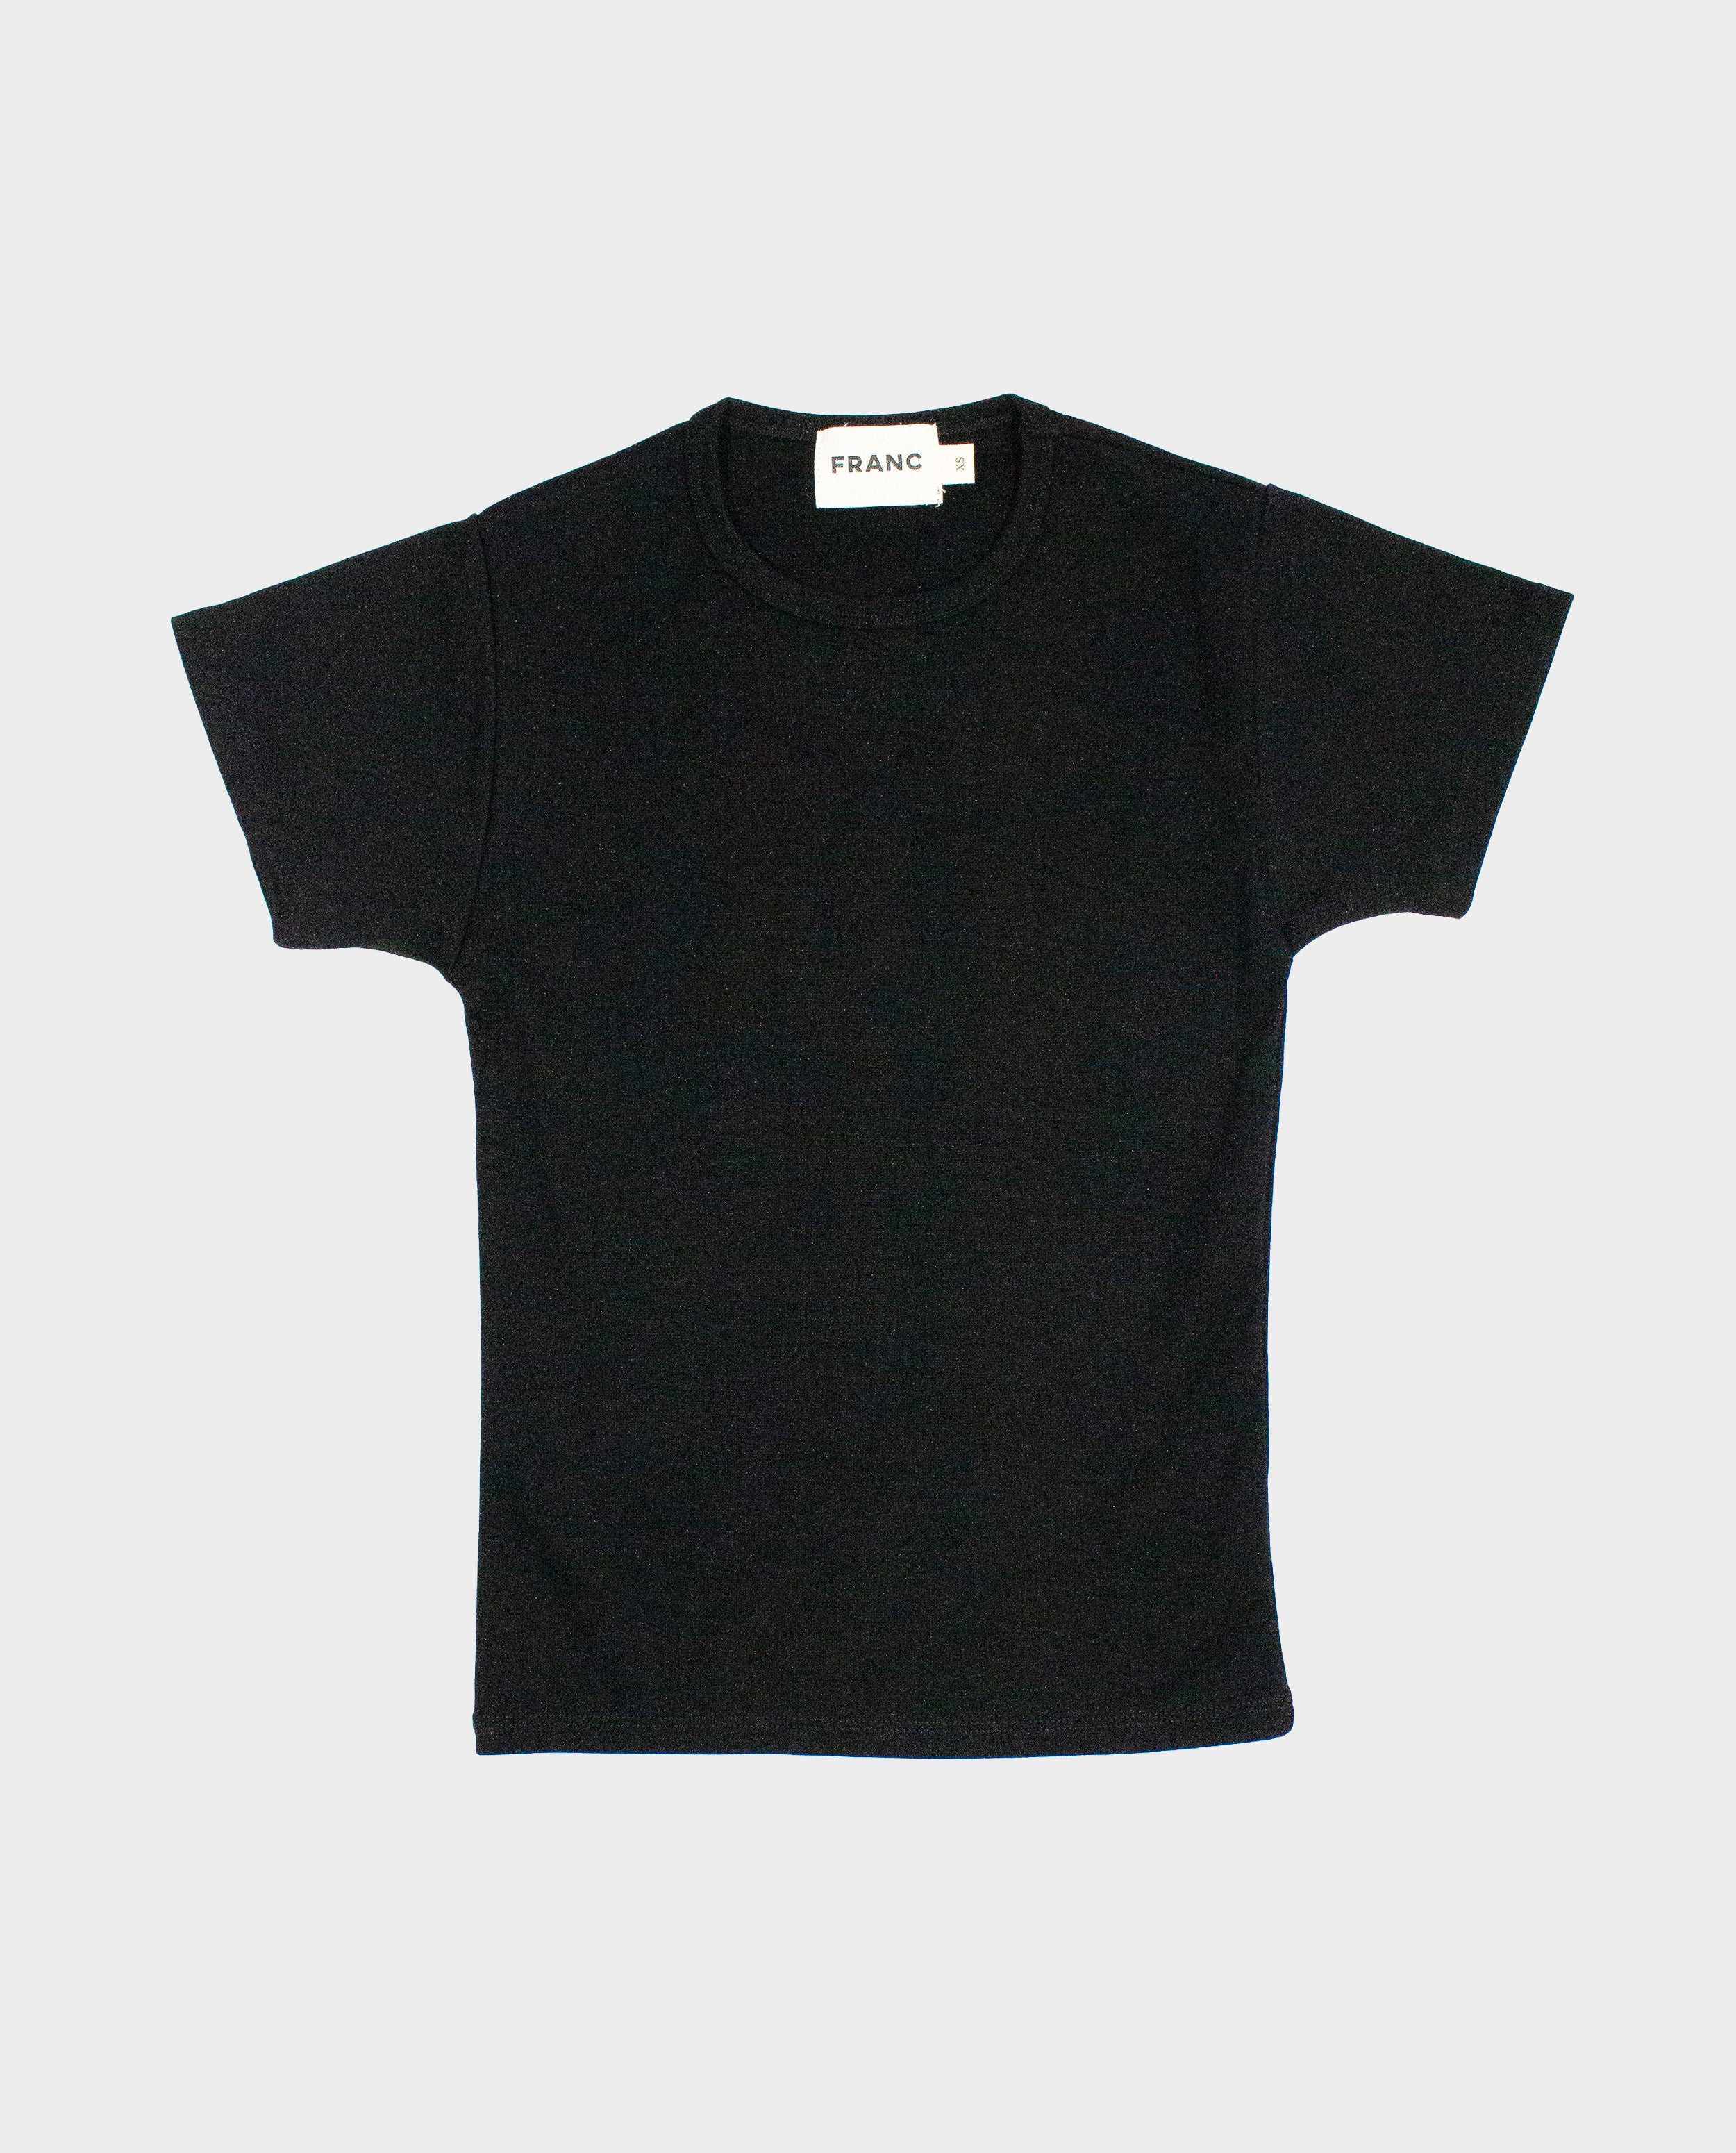 The Babe Tee in Black | FRANC Sustainable Clothing